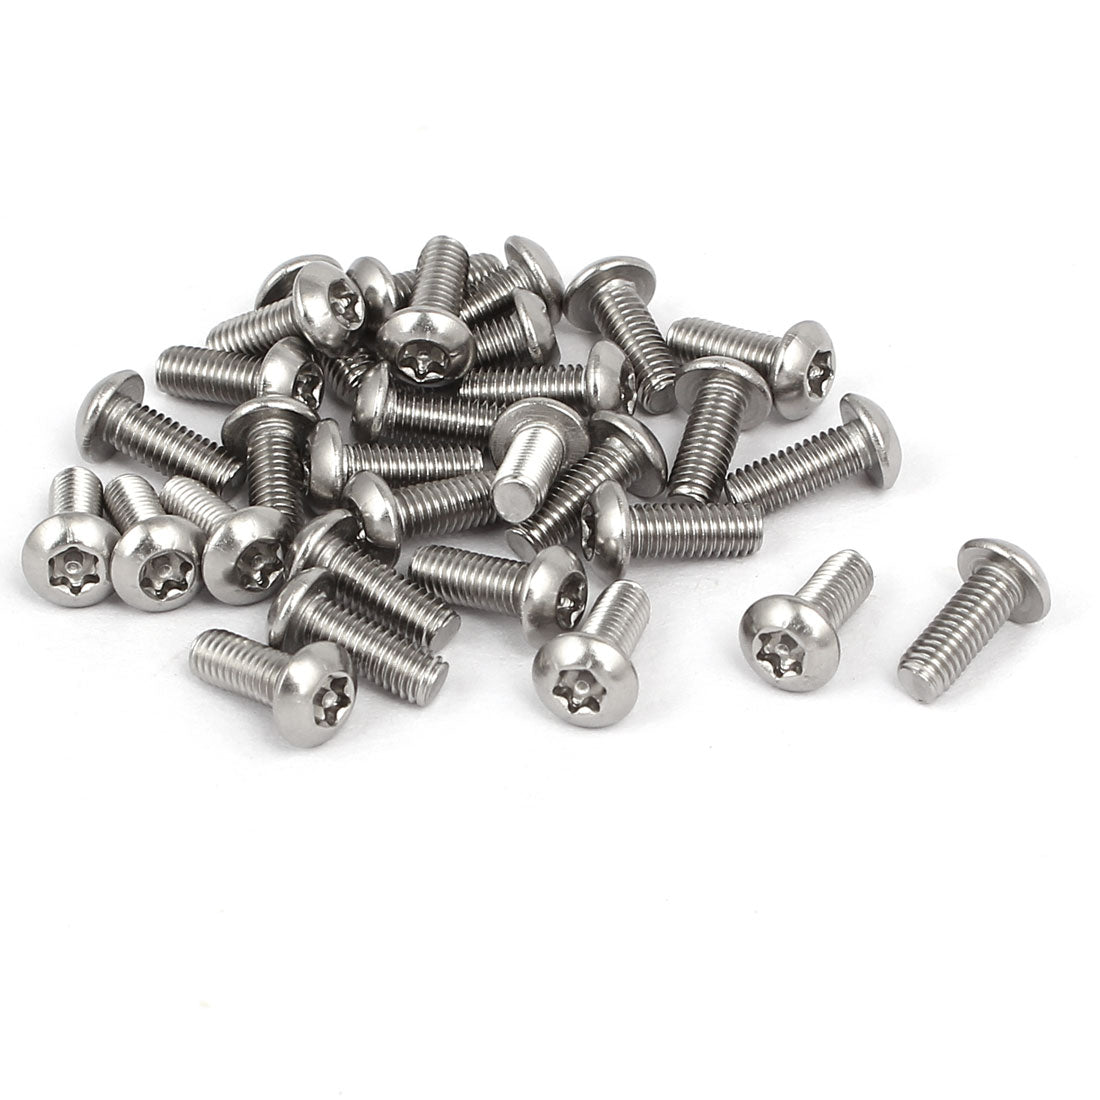 uxcell Uxcell M3x8mm 304 Stainless Steel Button Head Torx Security Machine Screws 30pcs